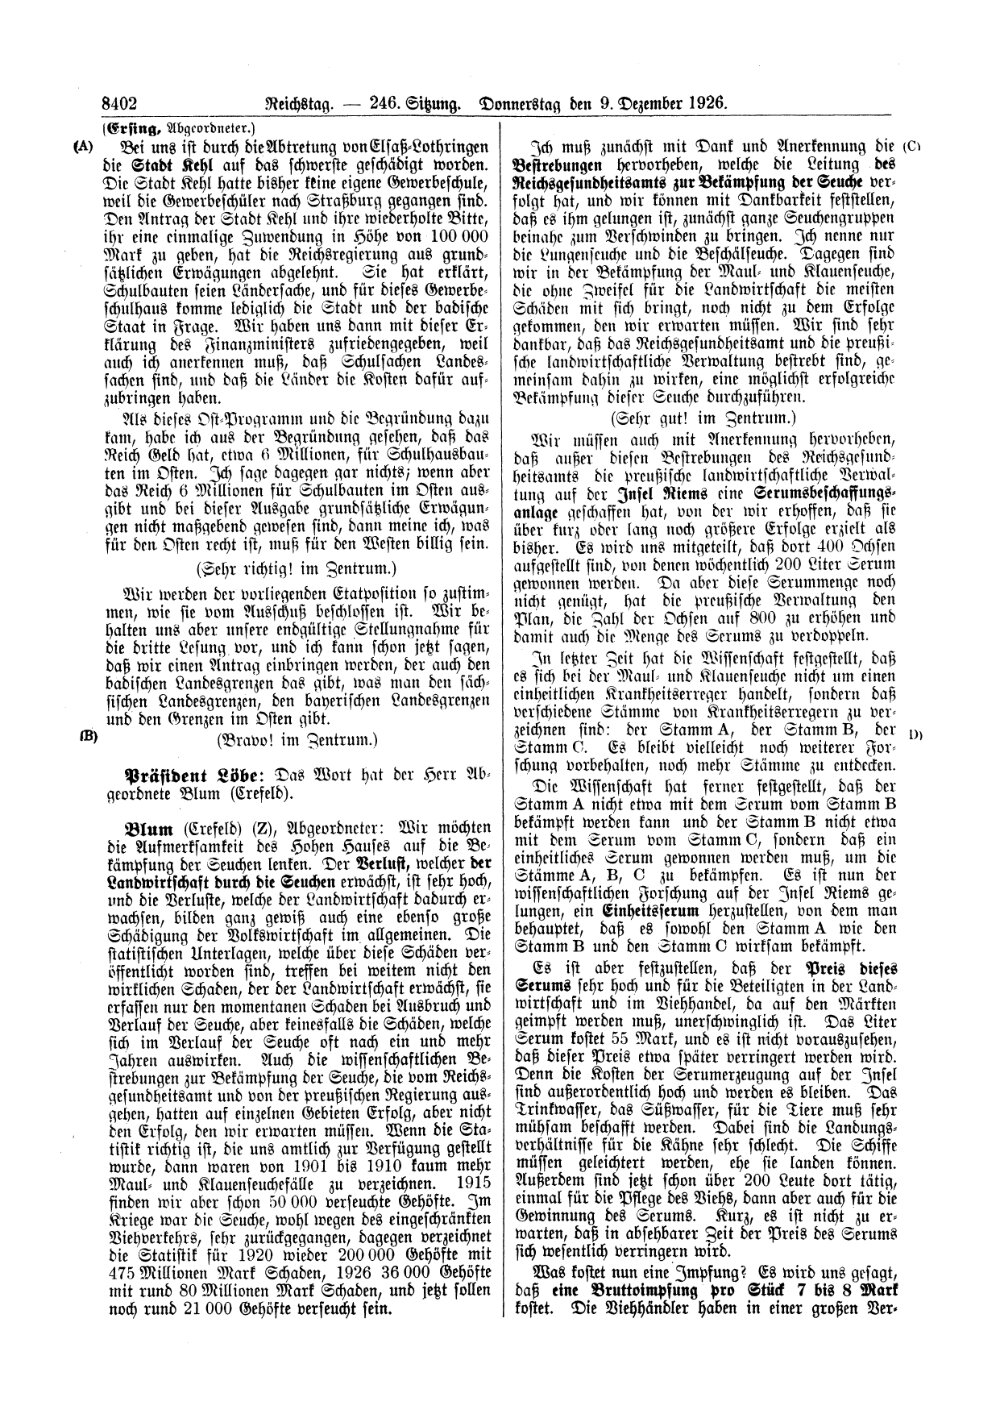 Scan of page 8402